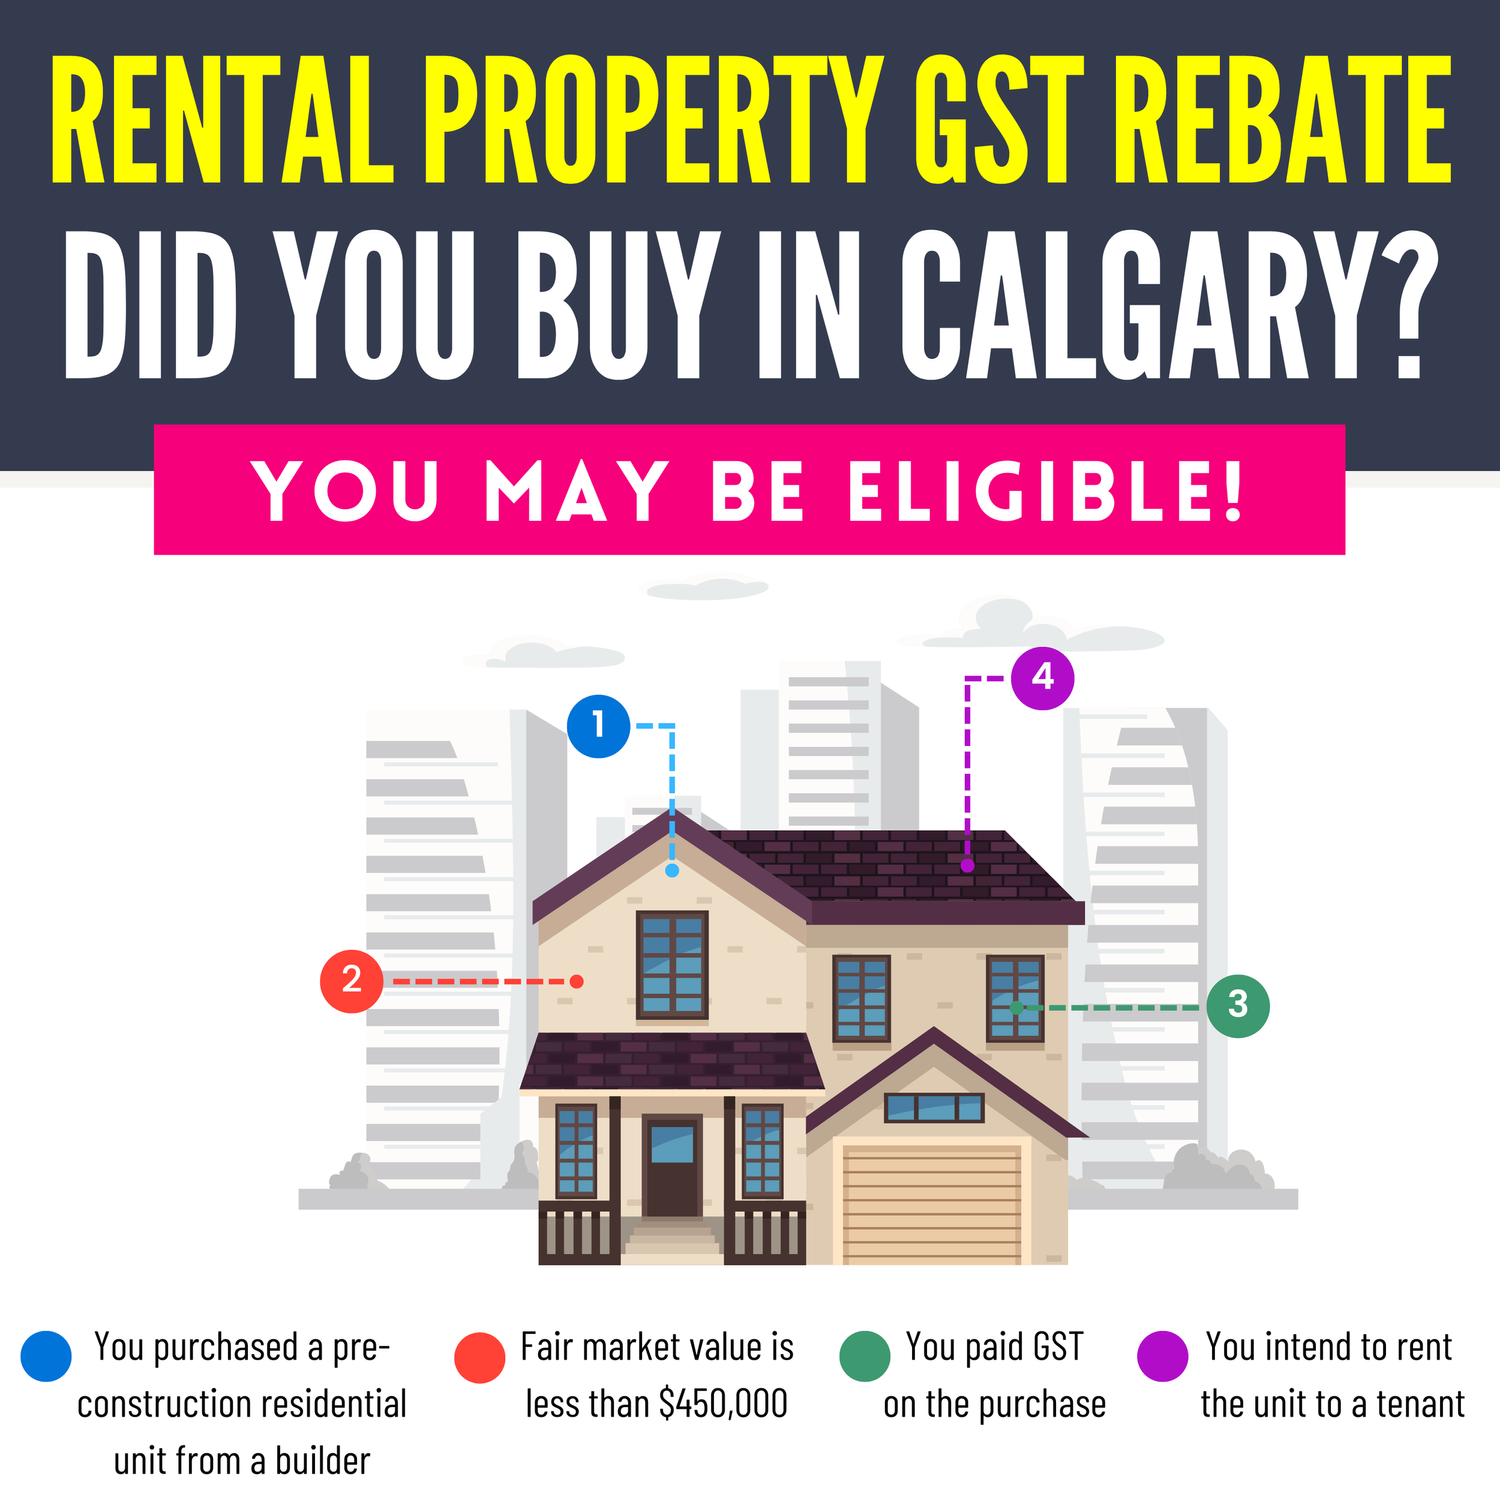 rental-property-gst-rebate-for-new-residential-homes-condo-millionaire